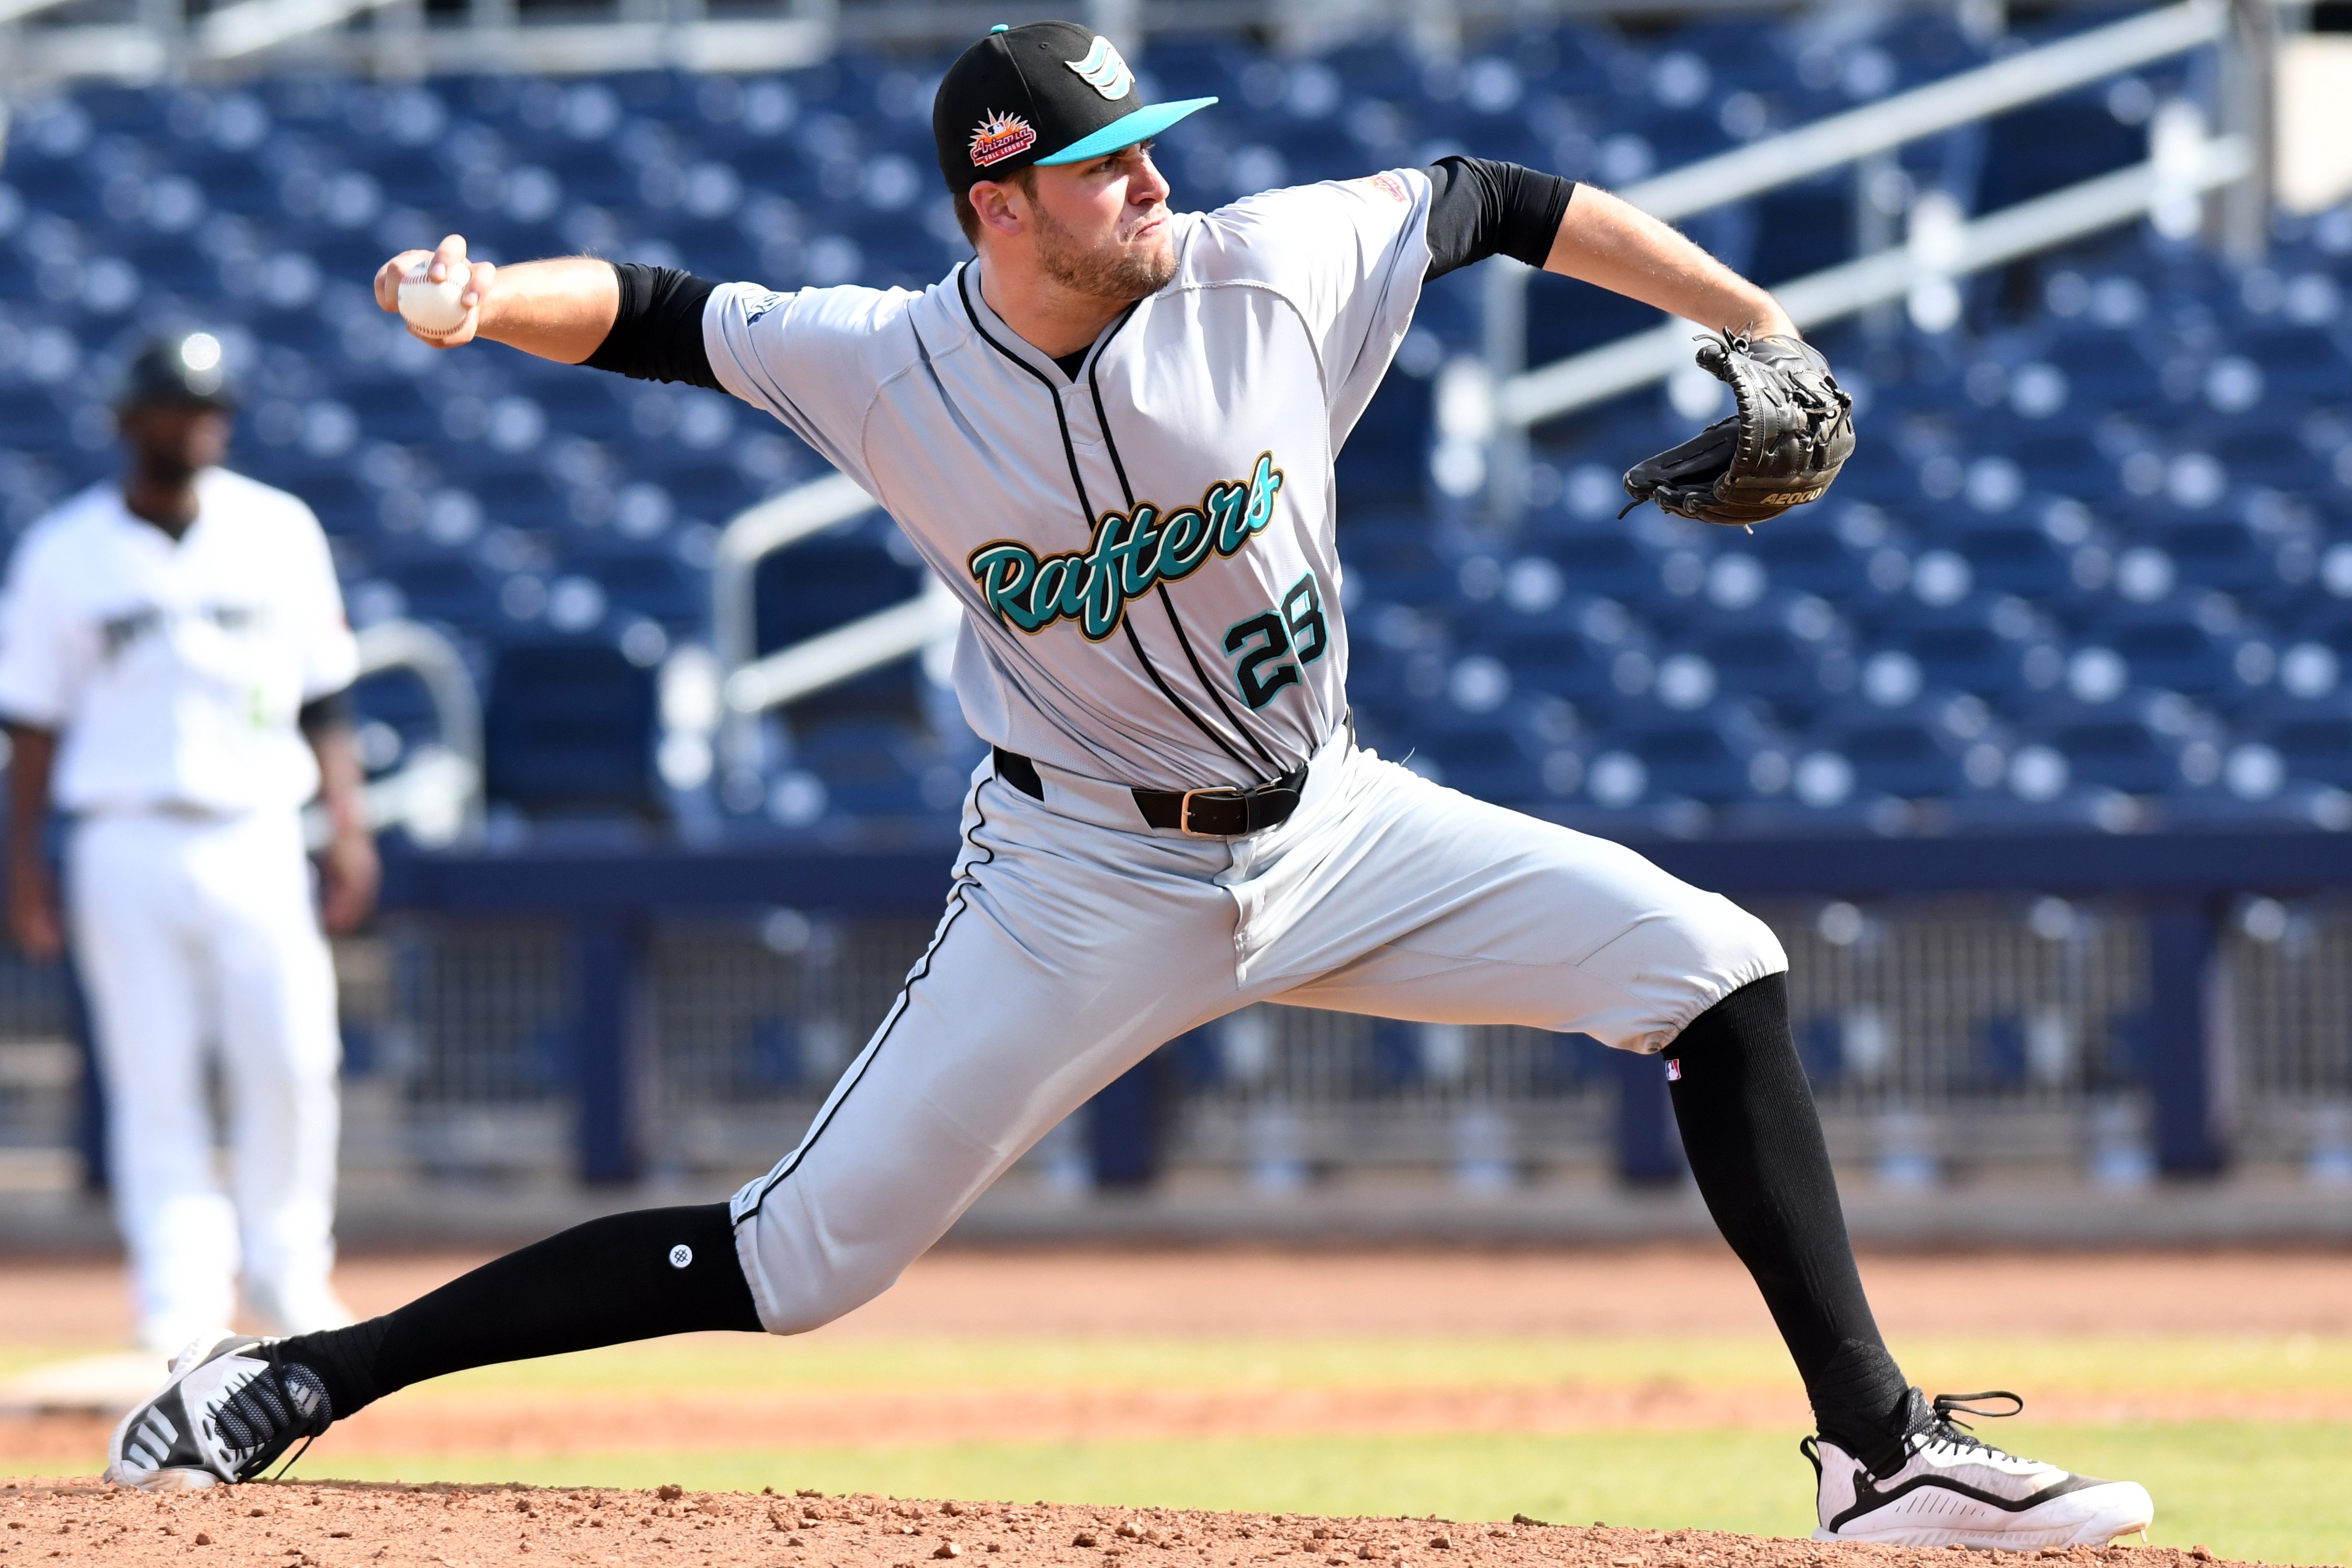 Simon Rosenblum-Larson pitches for the Salt River Rafters in 2019 in Arizona